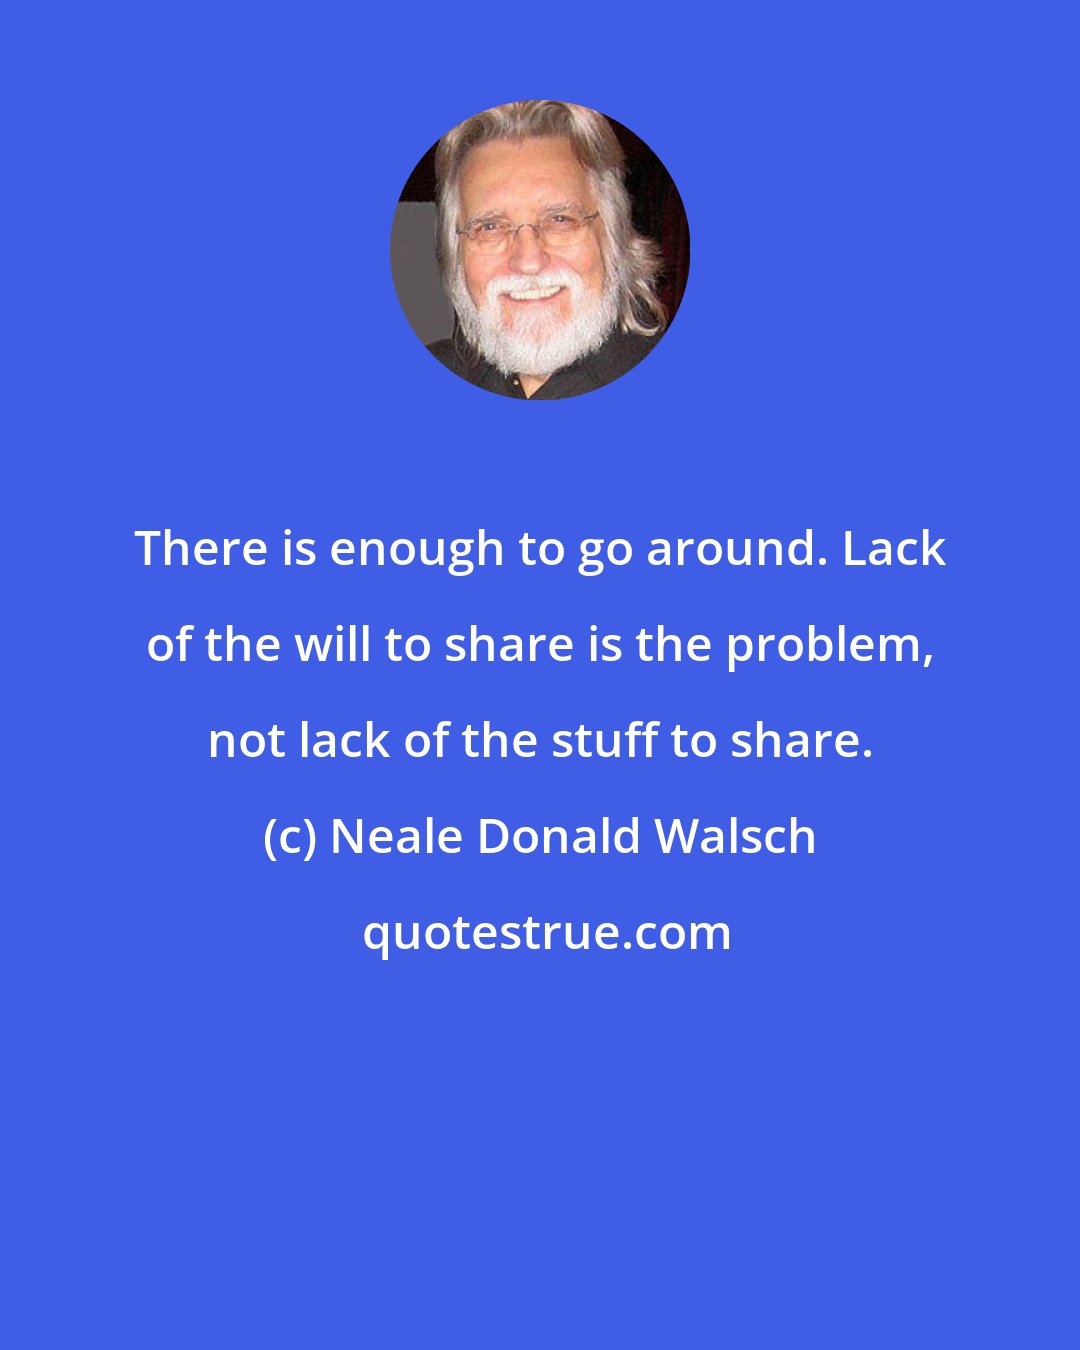 Neale Donald Walsch: There is enough to go around. Lack of the will to share is the problem, not lack of the stuff to share.